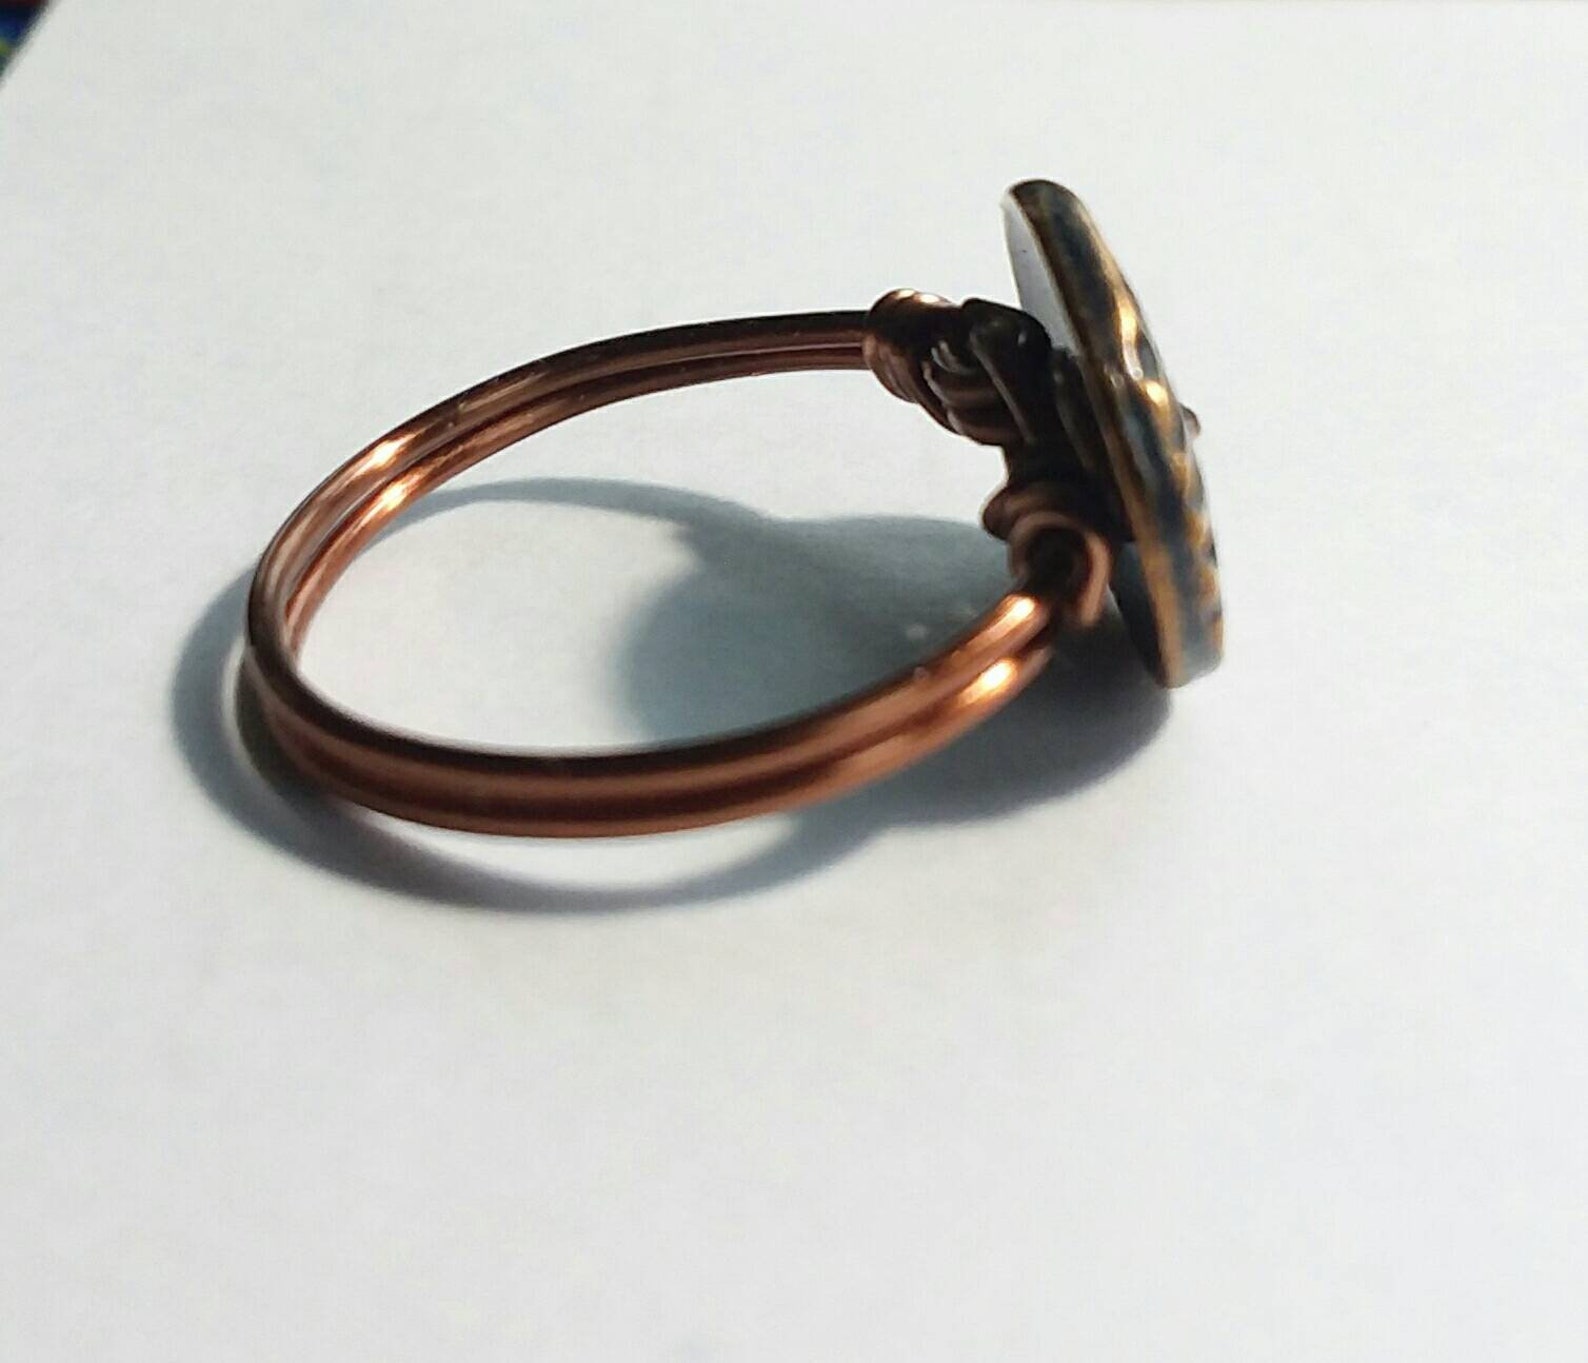 Pig Snout Ring in Antique Copper Silver Tone or Gold Tone - Etsy